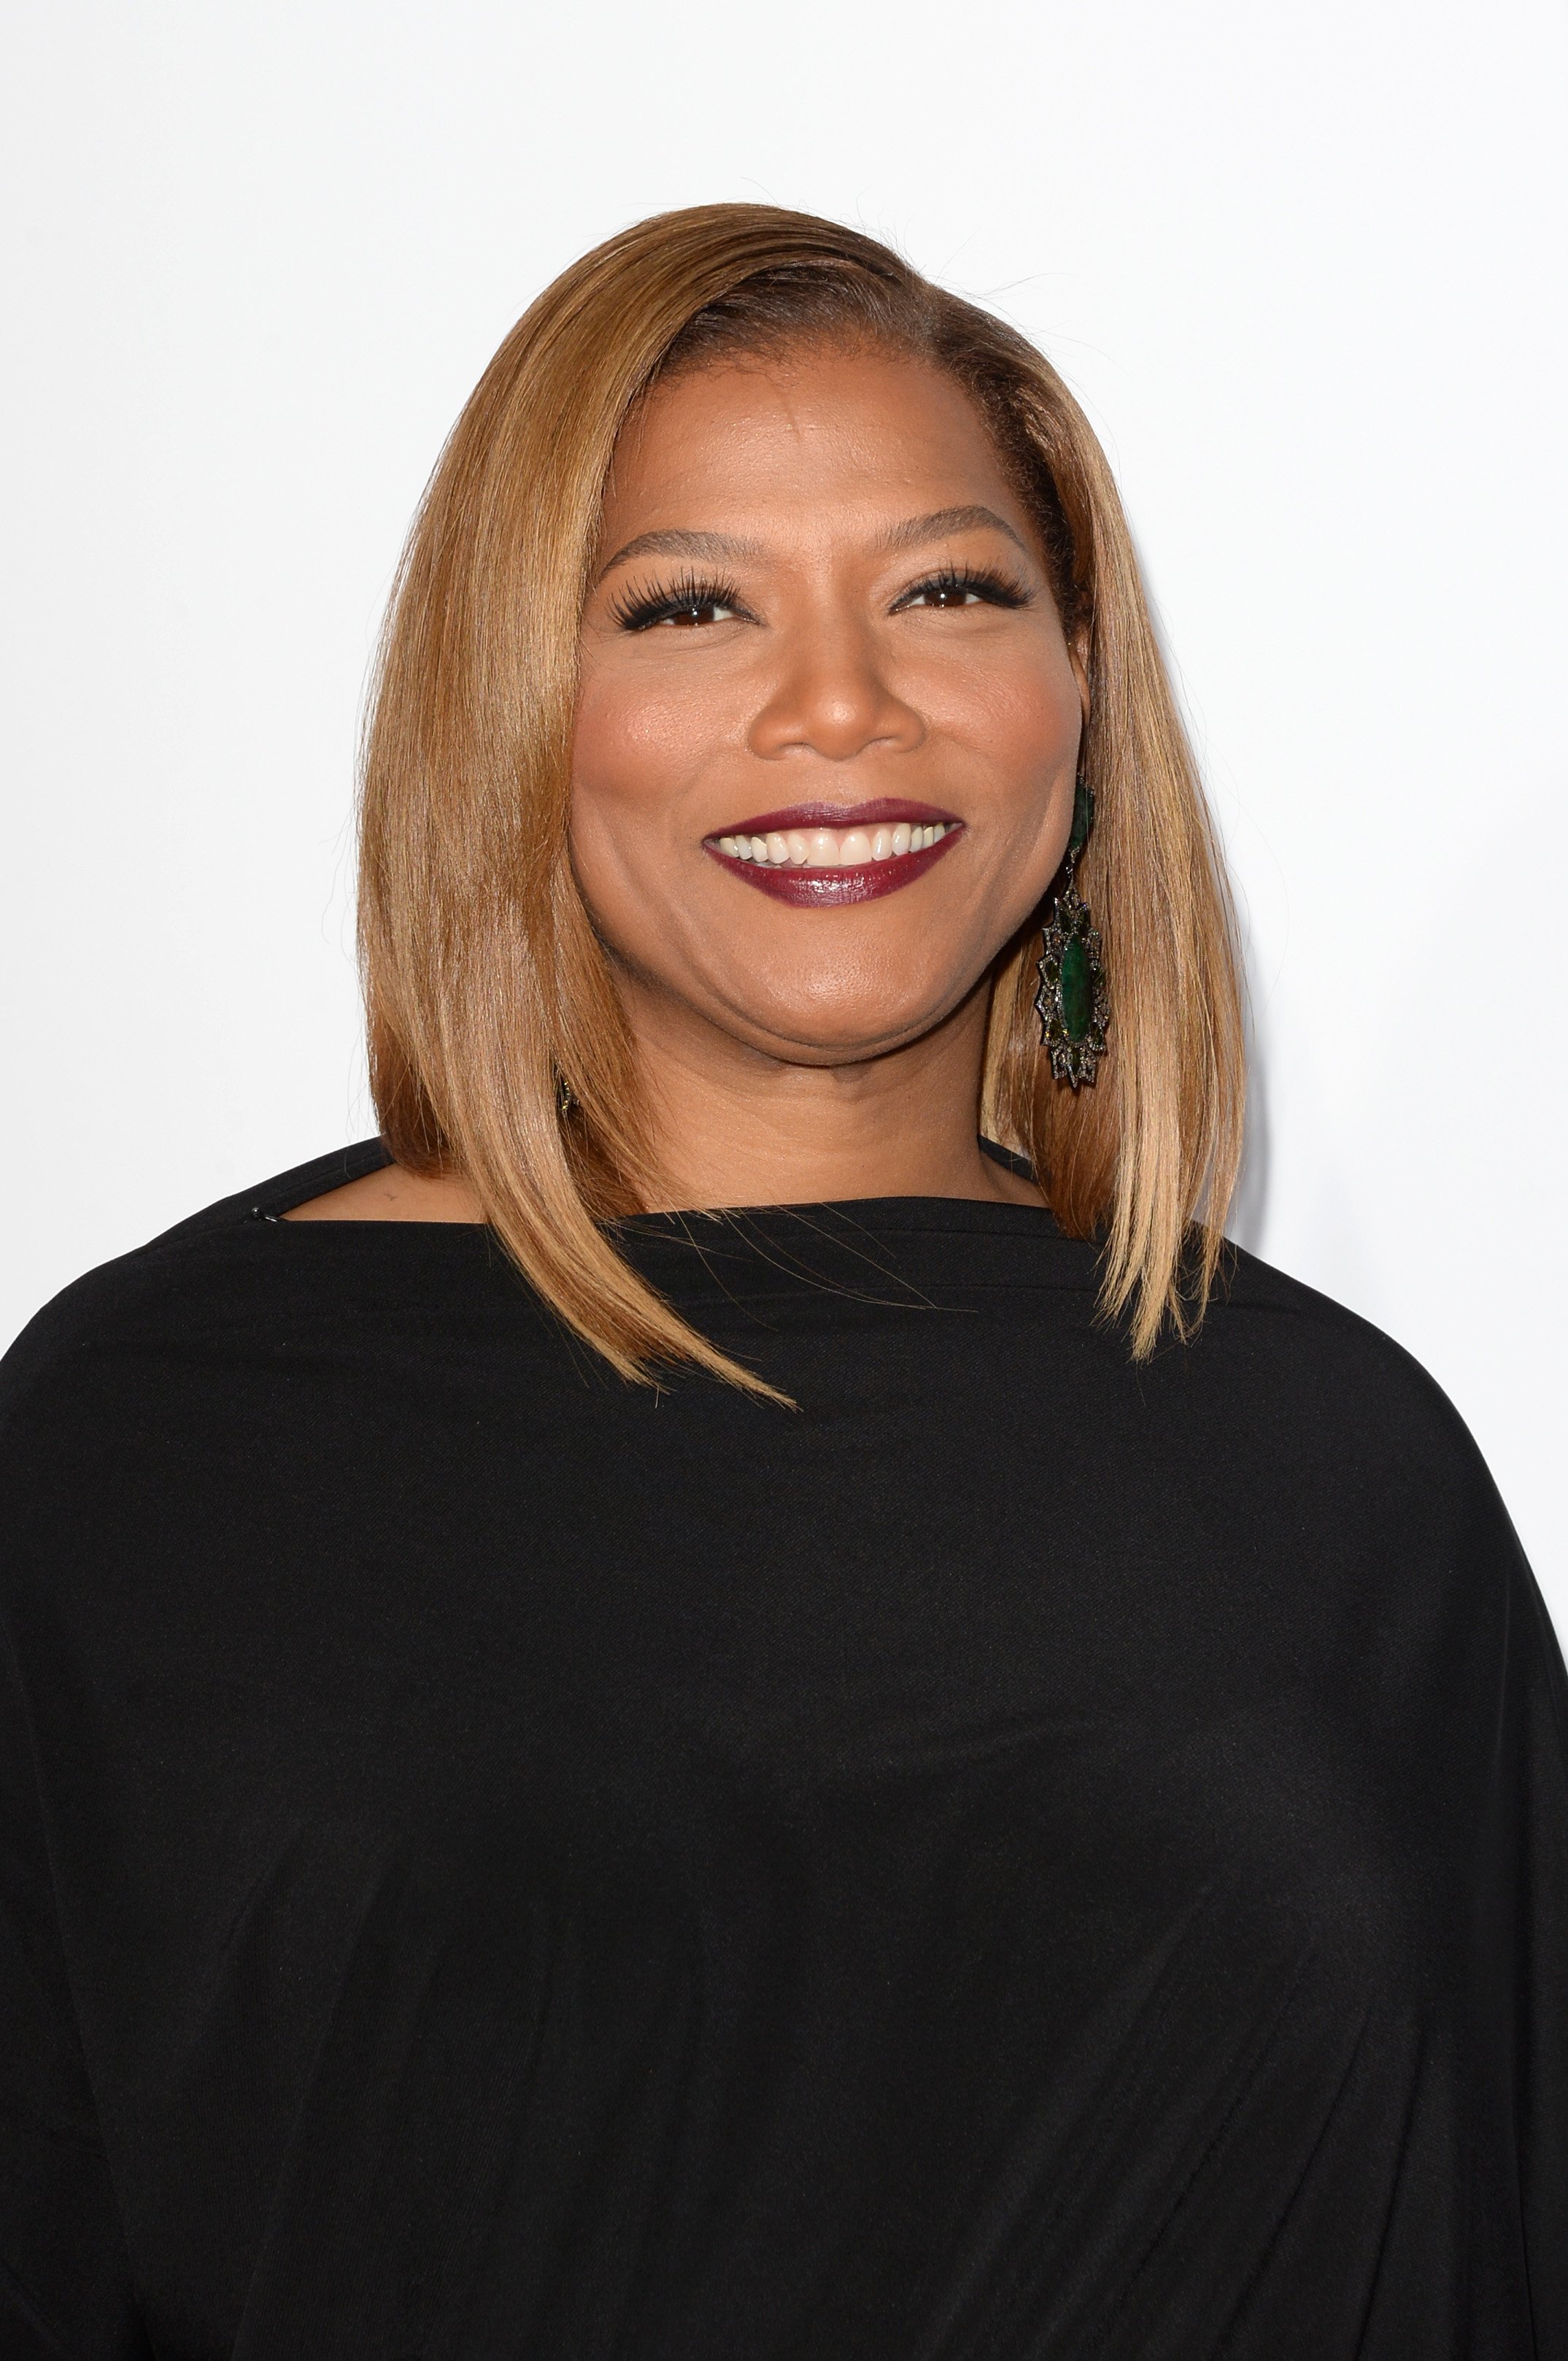 Queen Latifah at the People's Choice Awards in 2014. | Photo: Getty Images